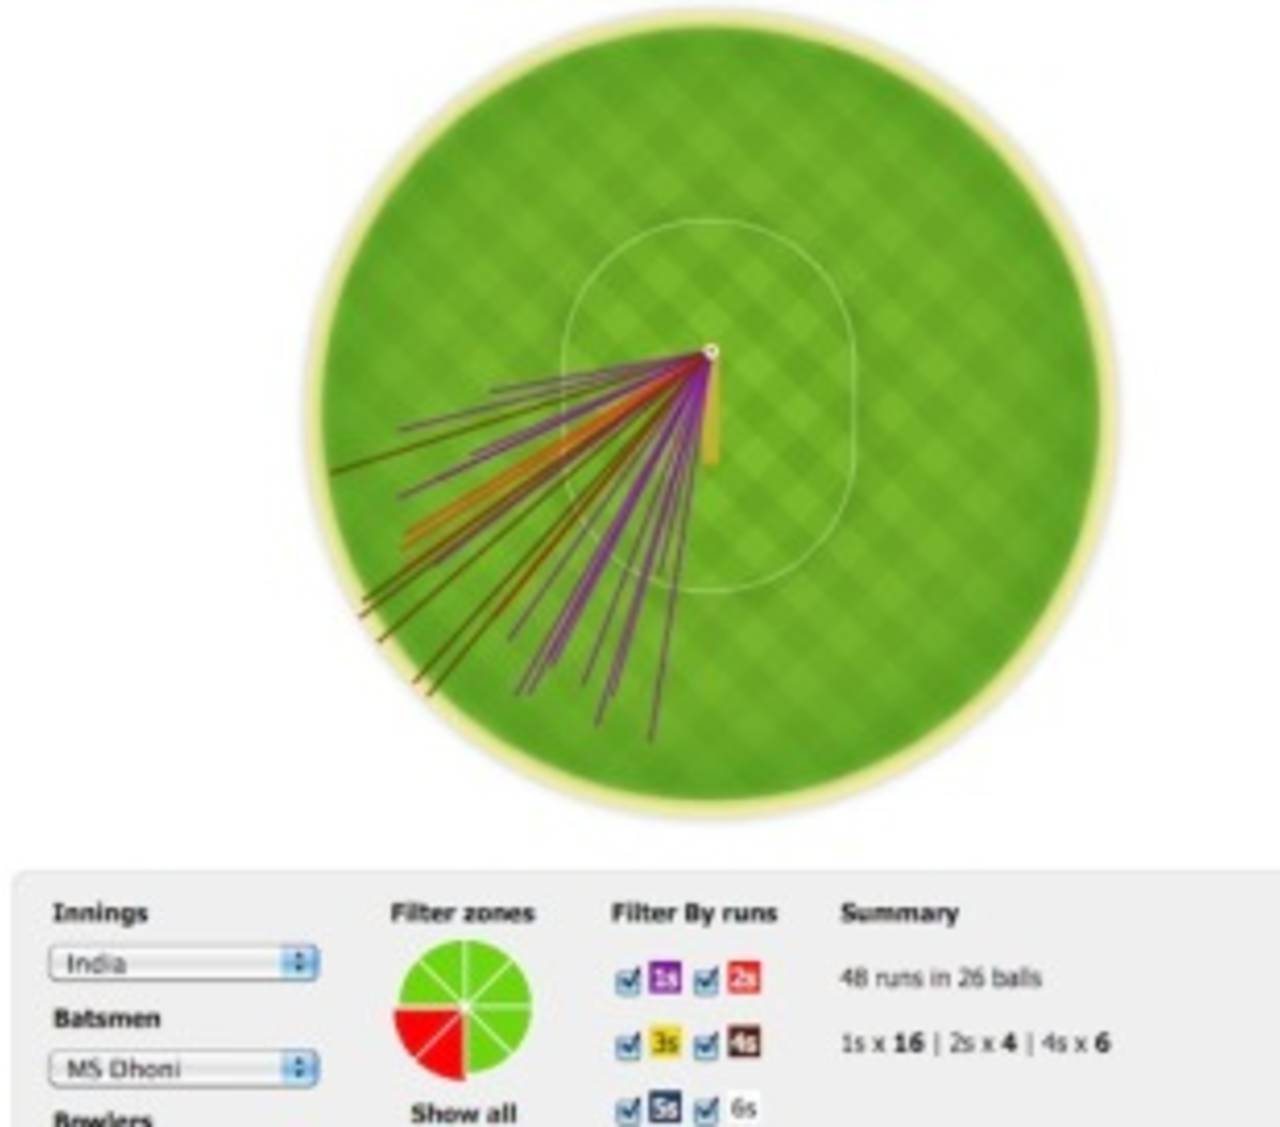 The wagon-wheel of MS Dhoni's runs scored in front of the wicket on the off side: 48 of his runs came in this region&nbsp;&nbsp;&bull;&nbsp;&nbsp;ESPNcricinfo Ltd